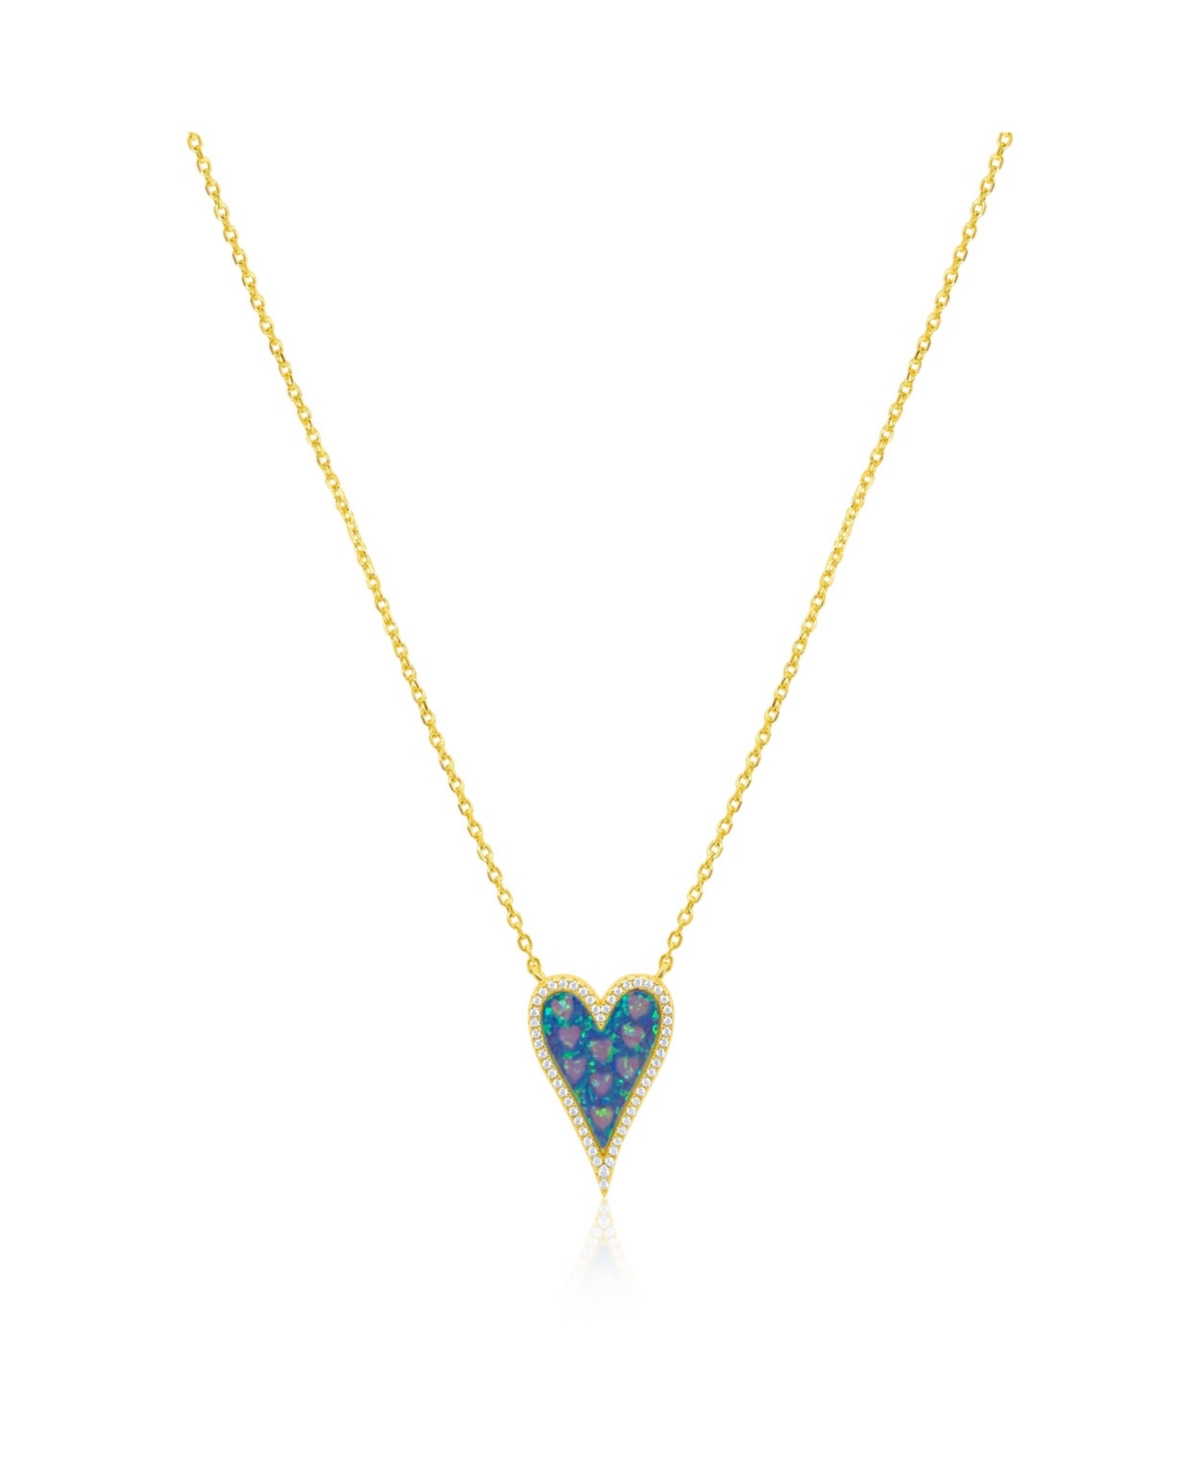 Yellow Gold Tone Created Opal and Cz Heart Necklace - Yellow